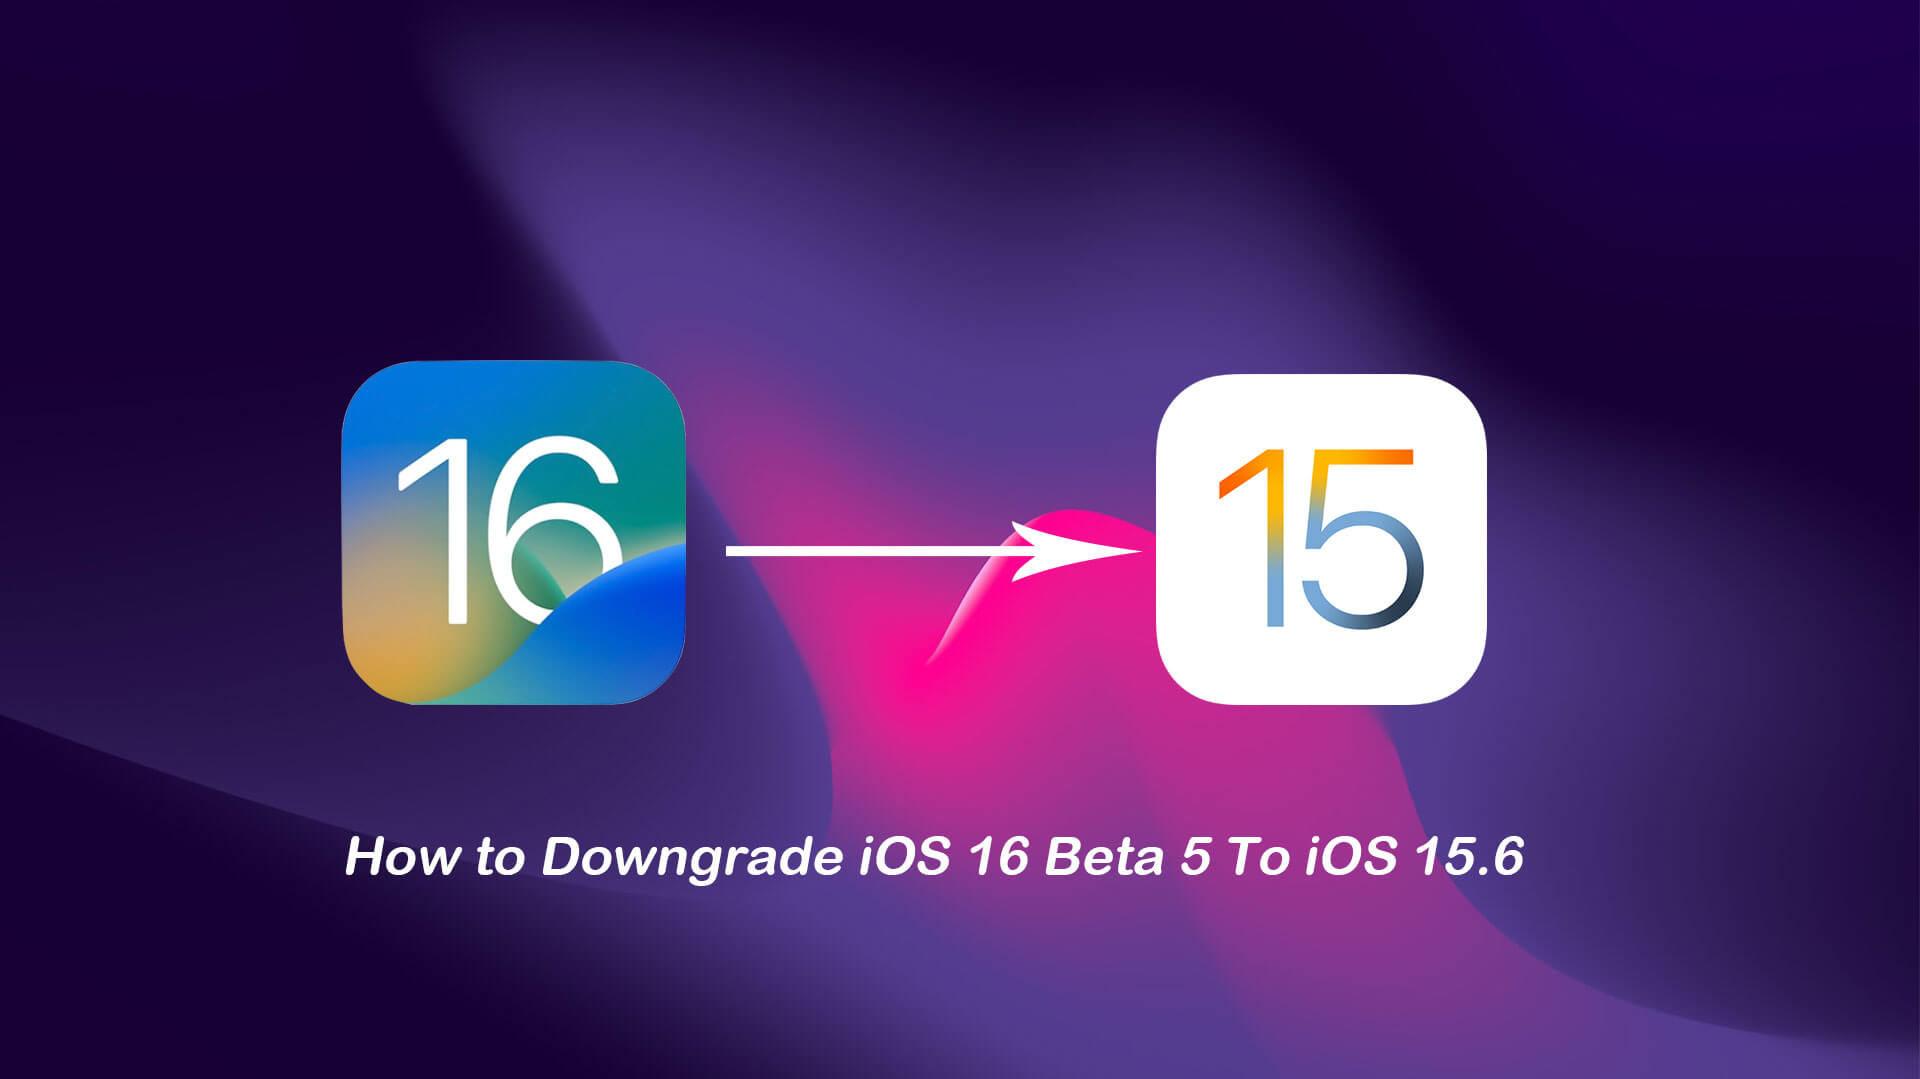 download-ios-16-to-15